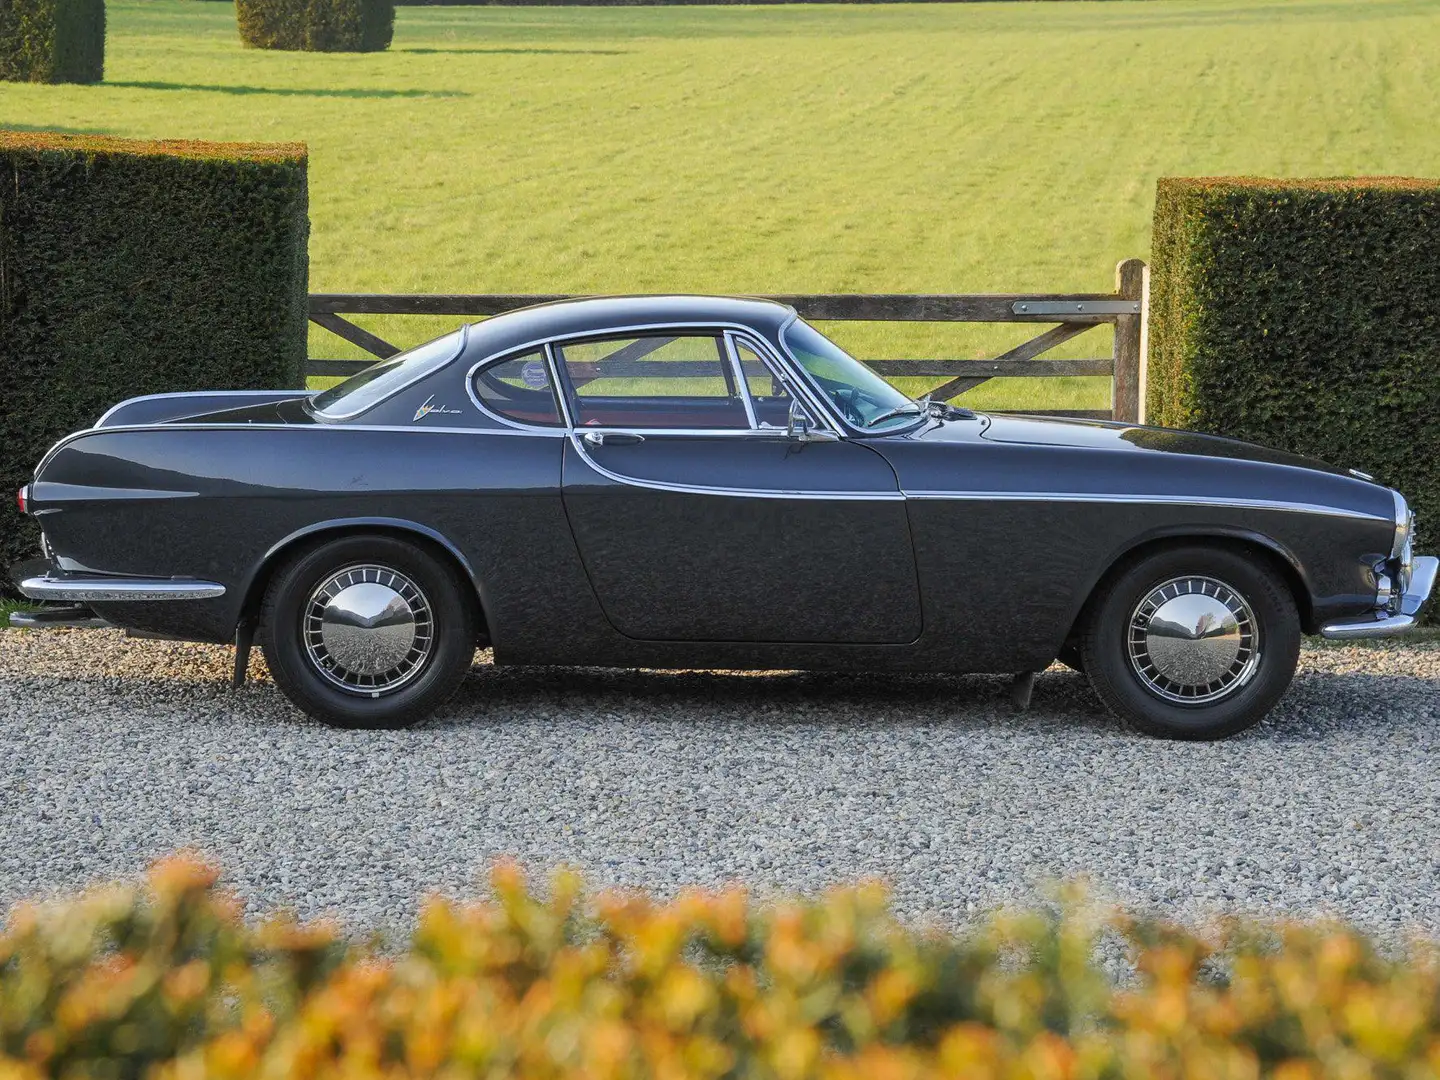 Volvo P1800 Restored - First year of production siva - 2